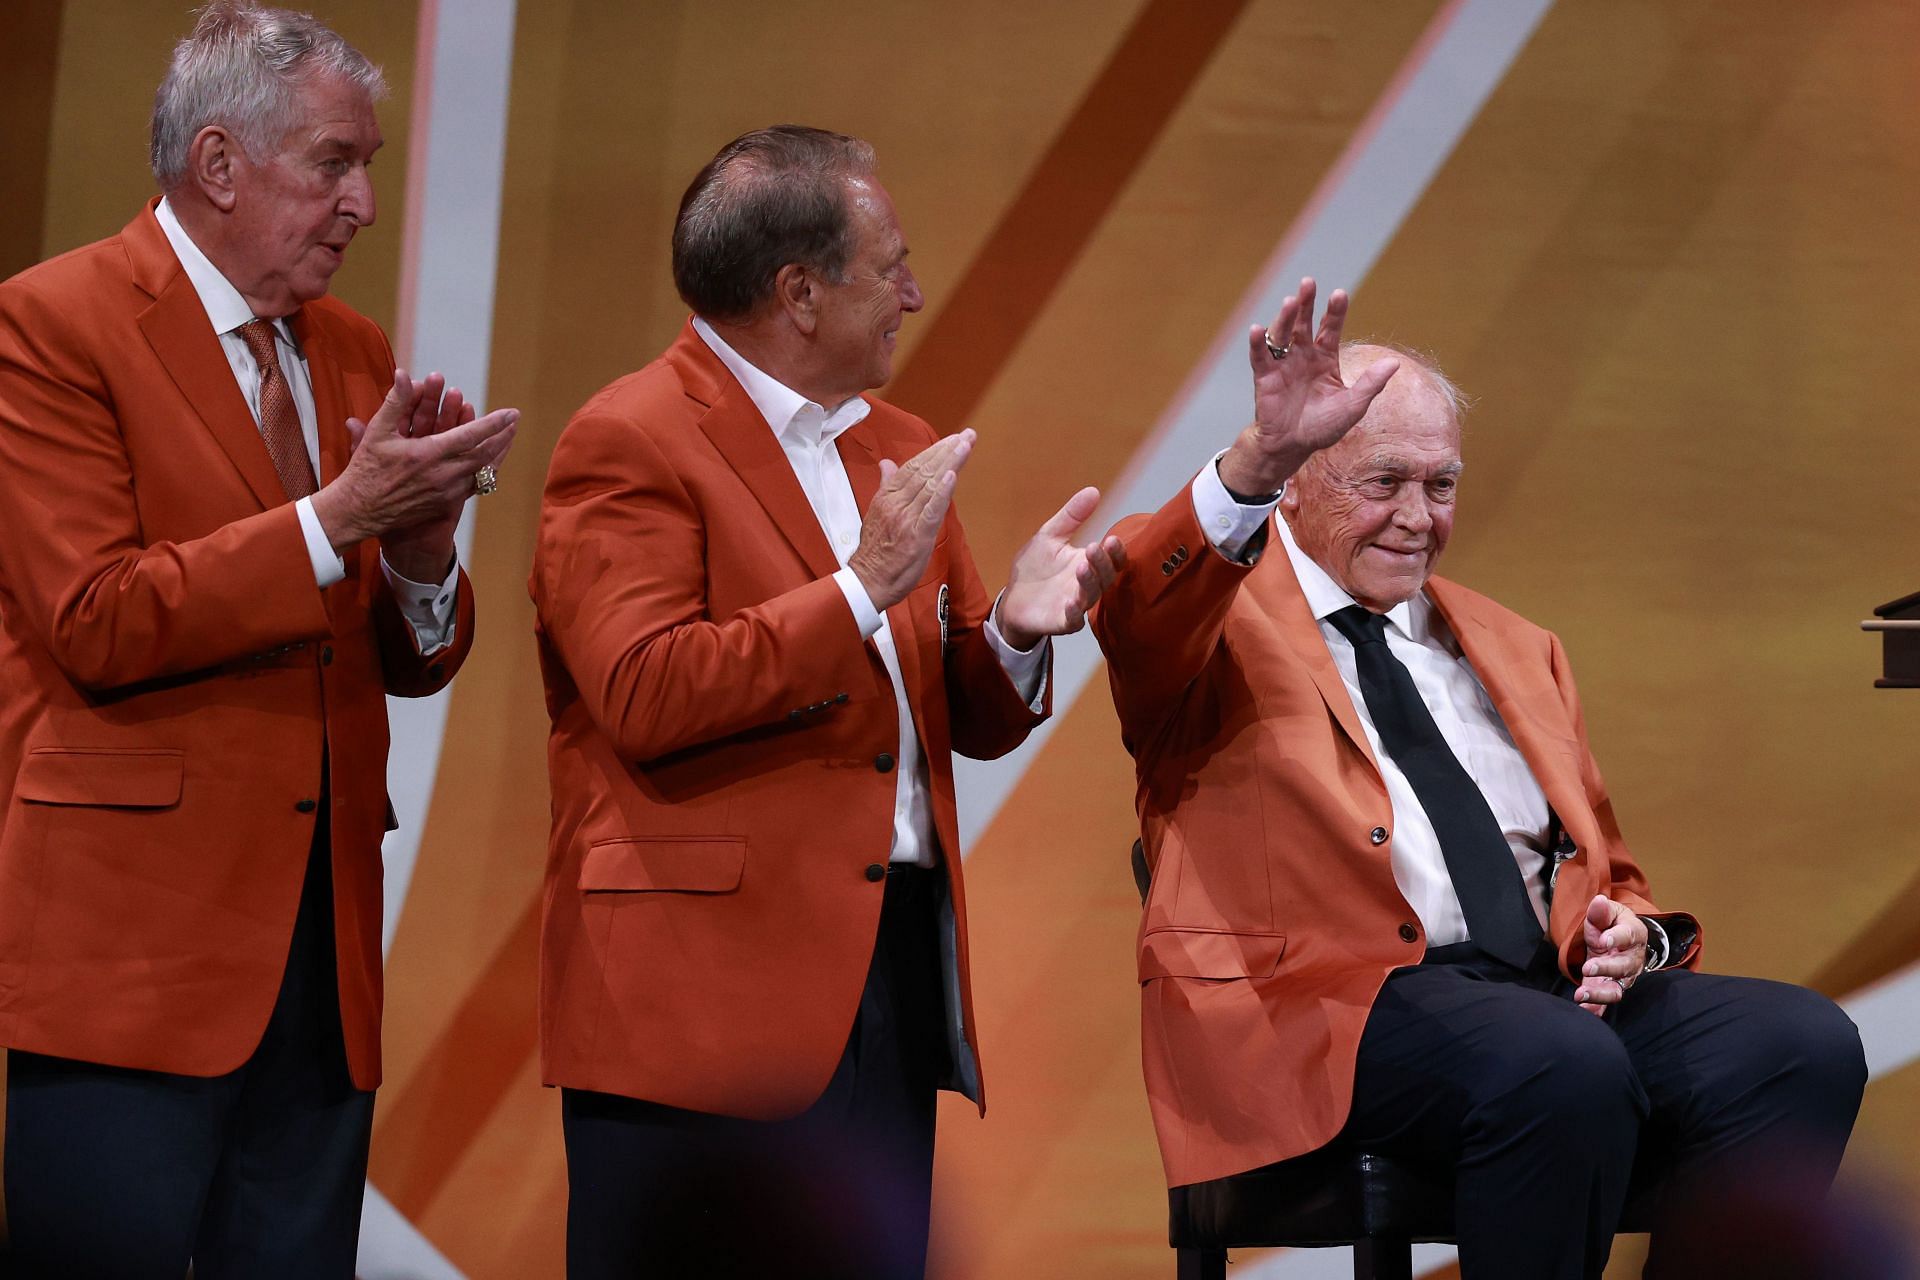 Purdue coach Gene Keady, waving on the right at the 2023 Basketball Hall of Fame Enshrinement Ceremony, recruited Painter to Purdue as a player and helped bring Painter back to replace him in 2005.